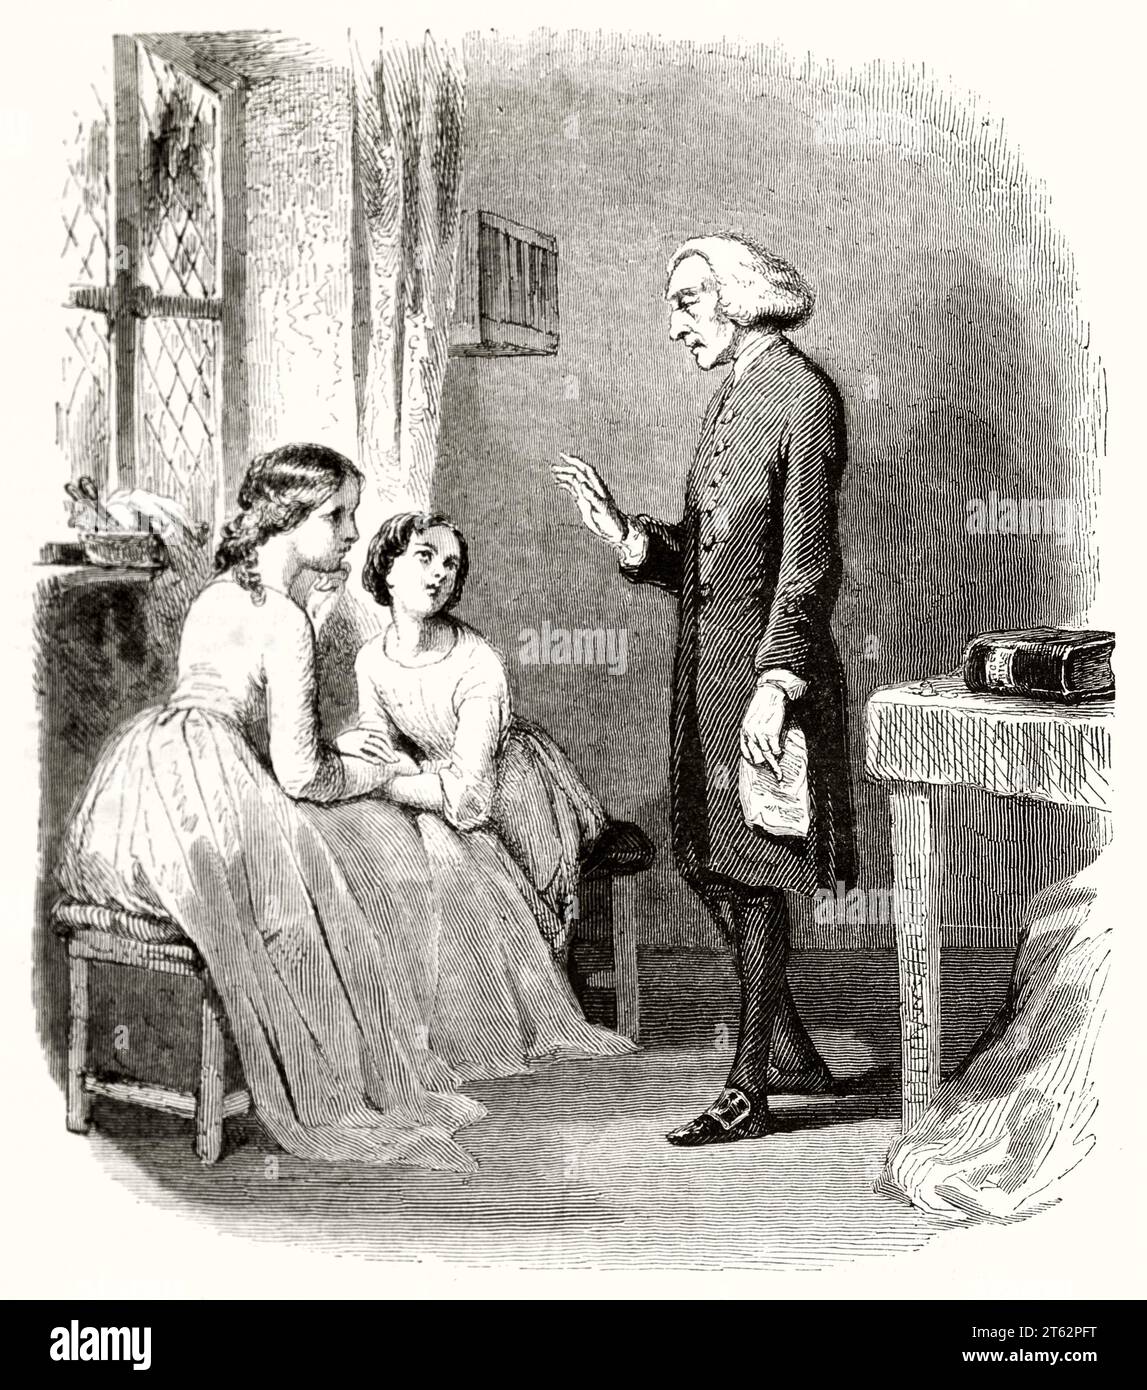 Old illustration of man talking with two girls. By Tony Johannot, publ. on Magasin Pittoresque, Paris, 1849 Stock Photo